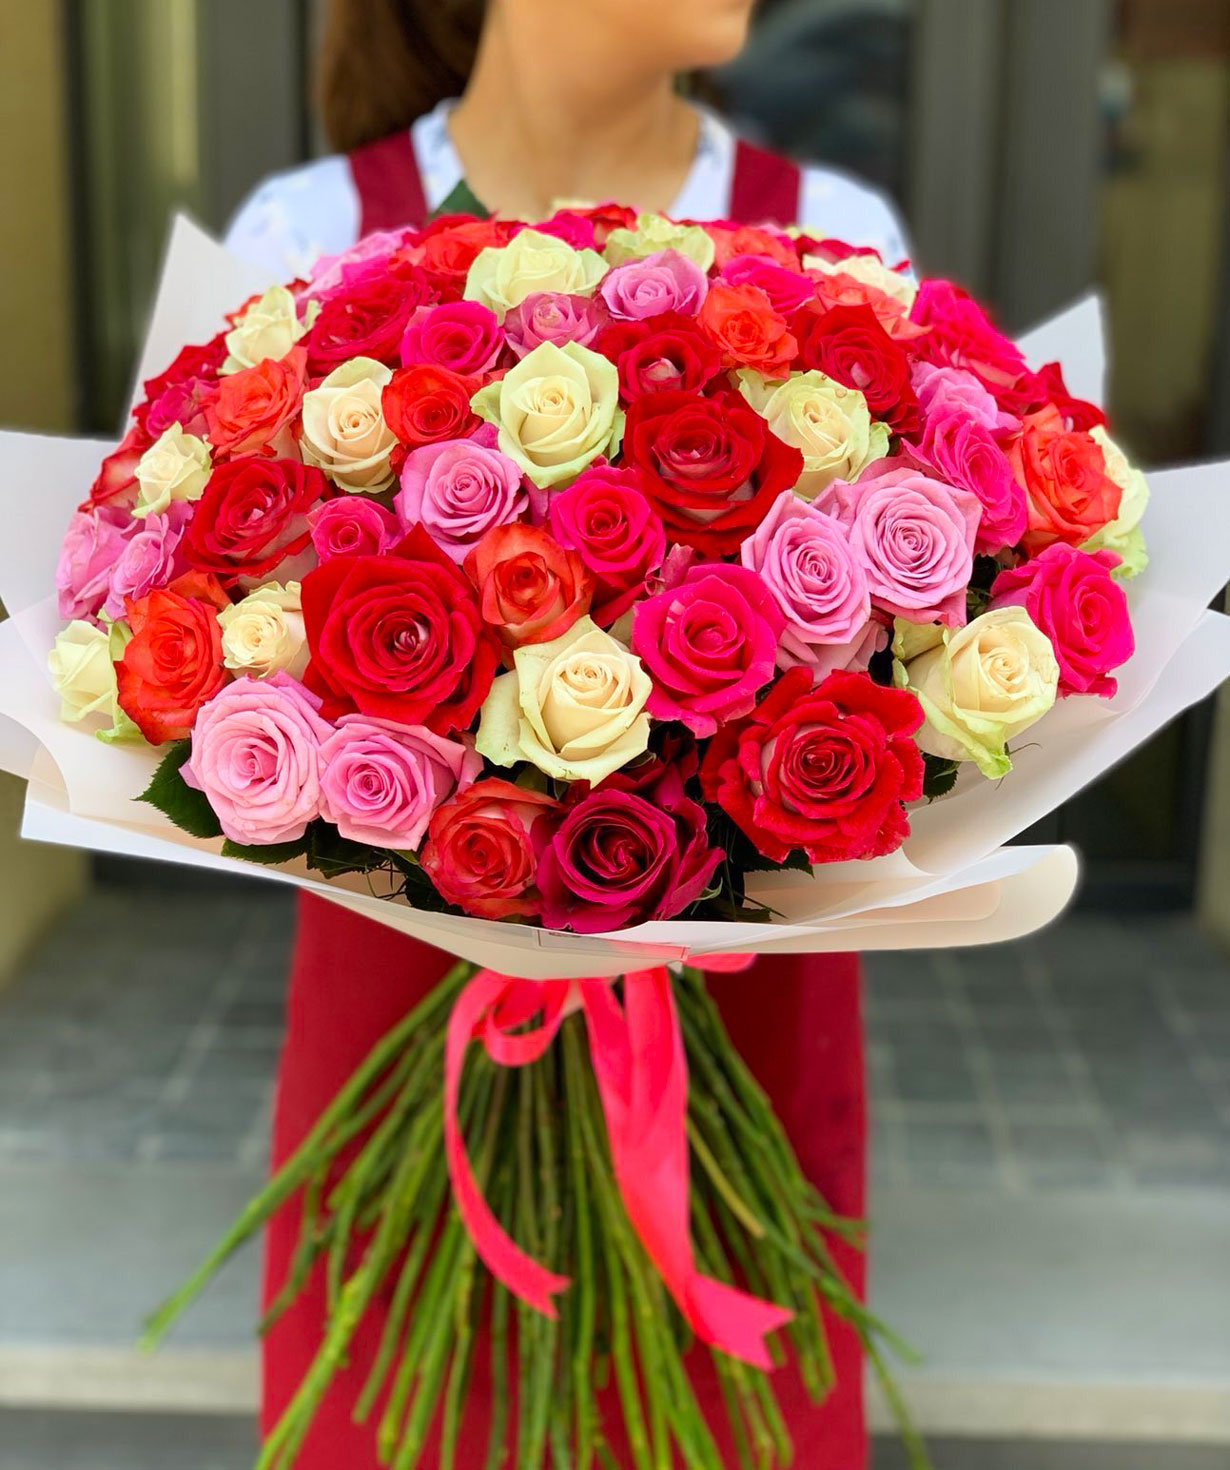 Bouquet `Porte` with roses